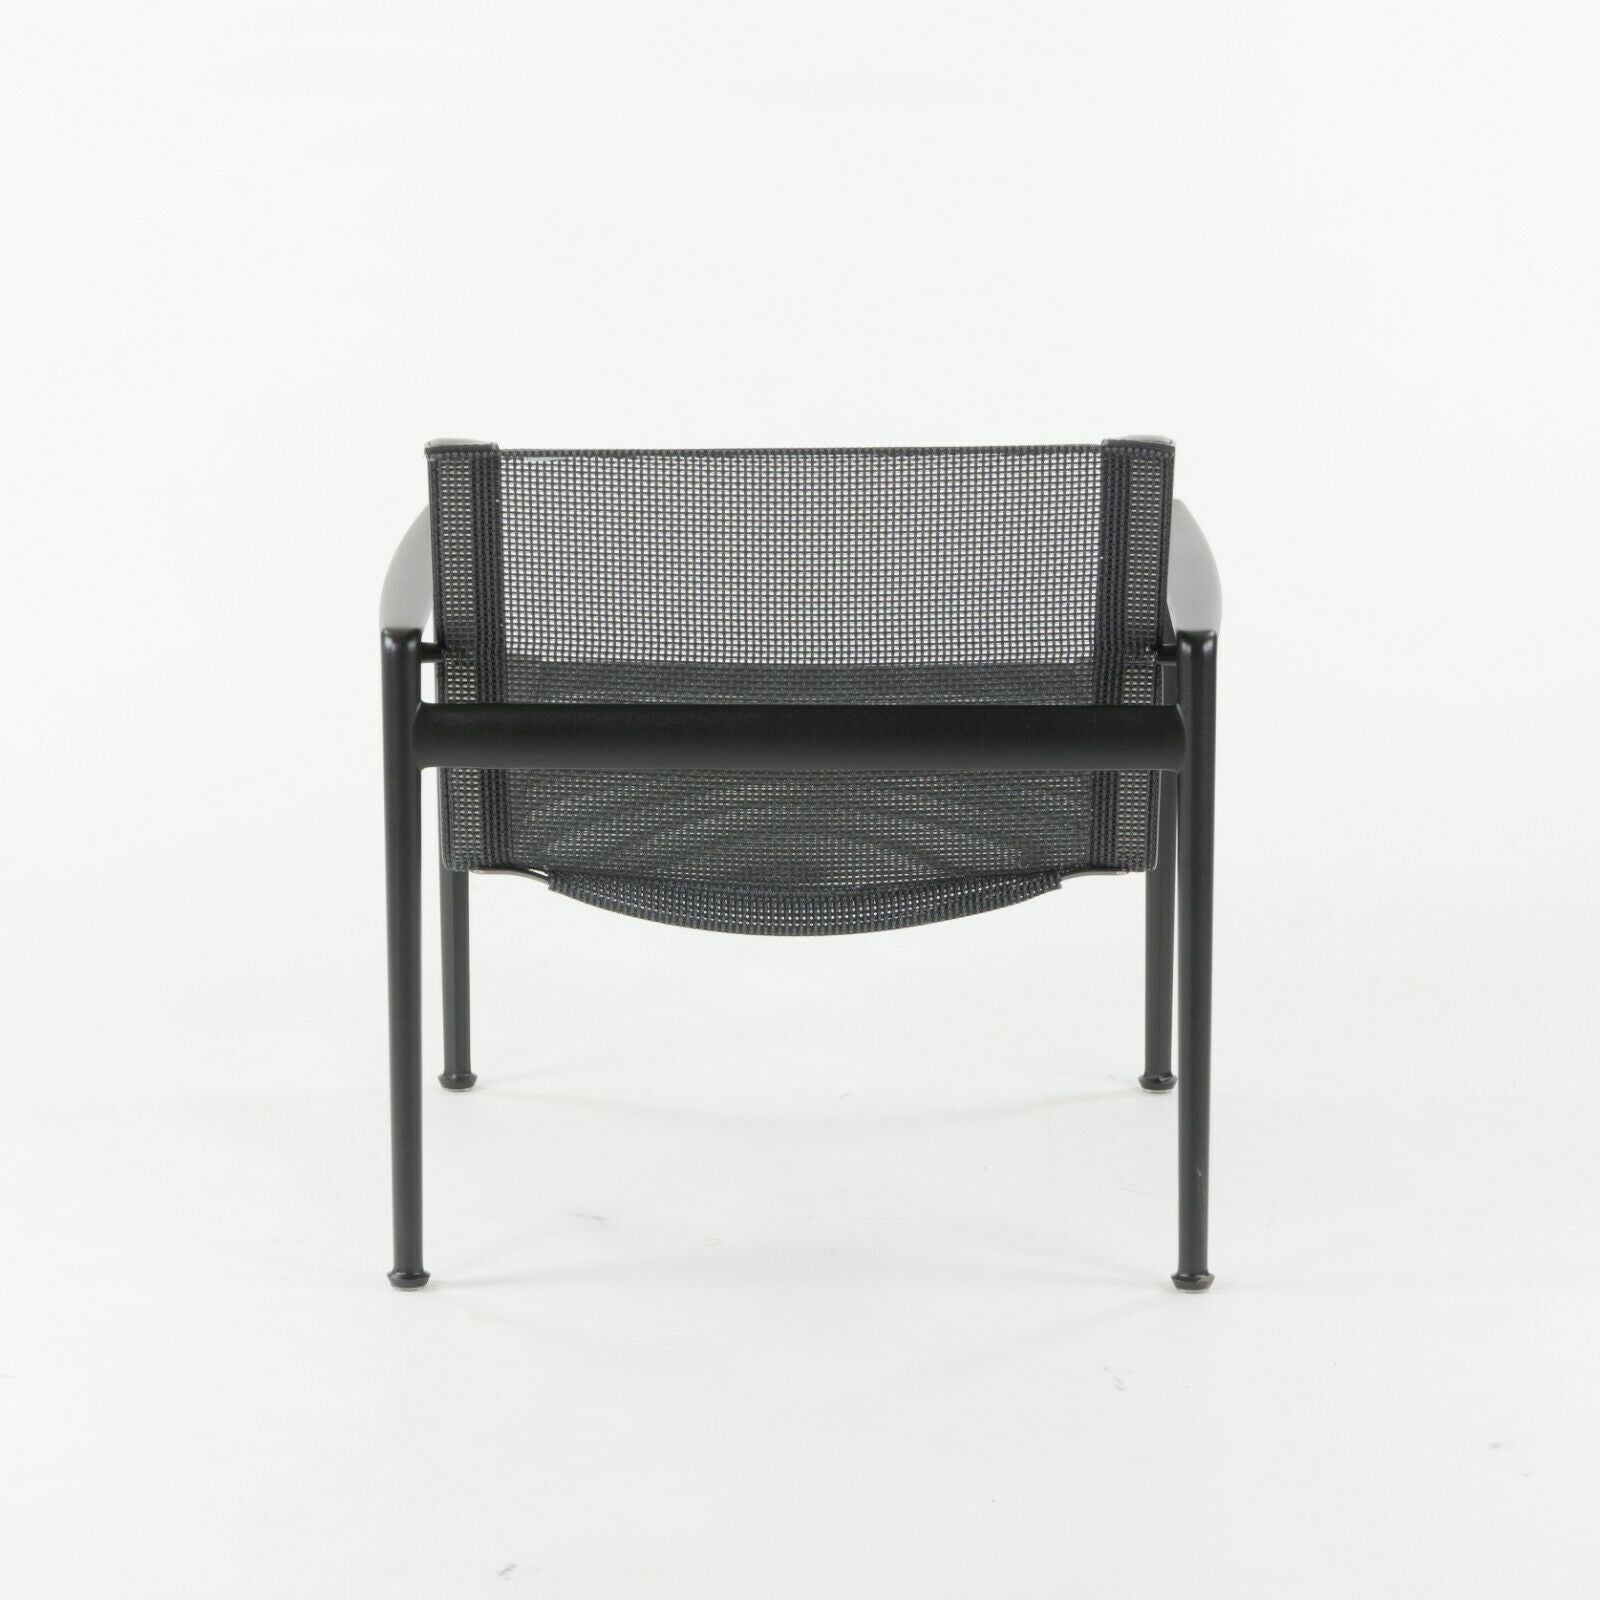 SOLD Richard Schultz Design for Knoll 1966 Series Lounge Arm Chair in Black 4x Avail